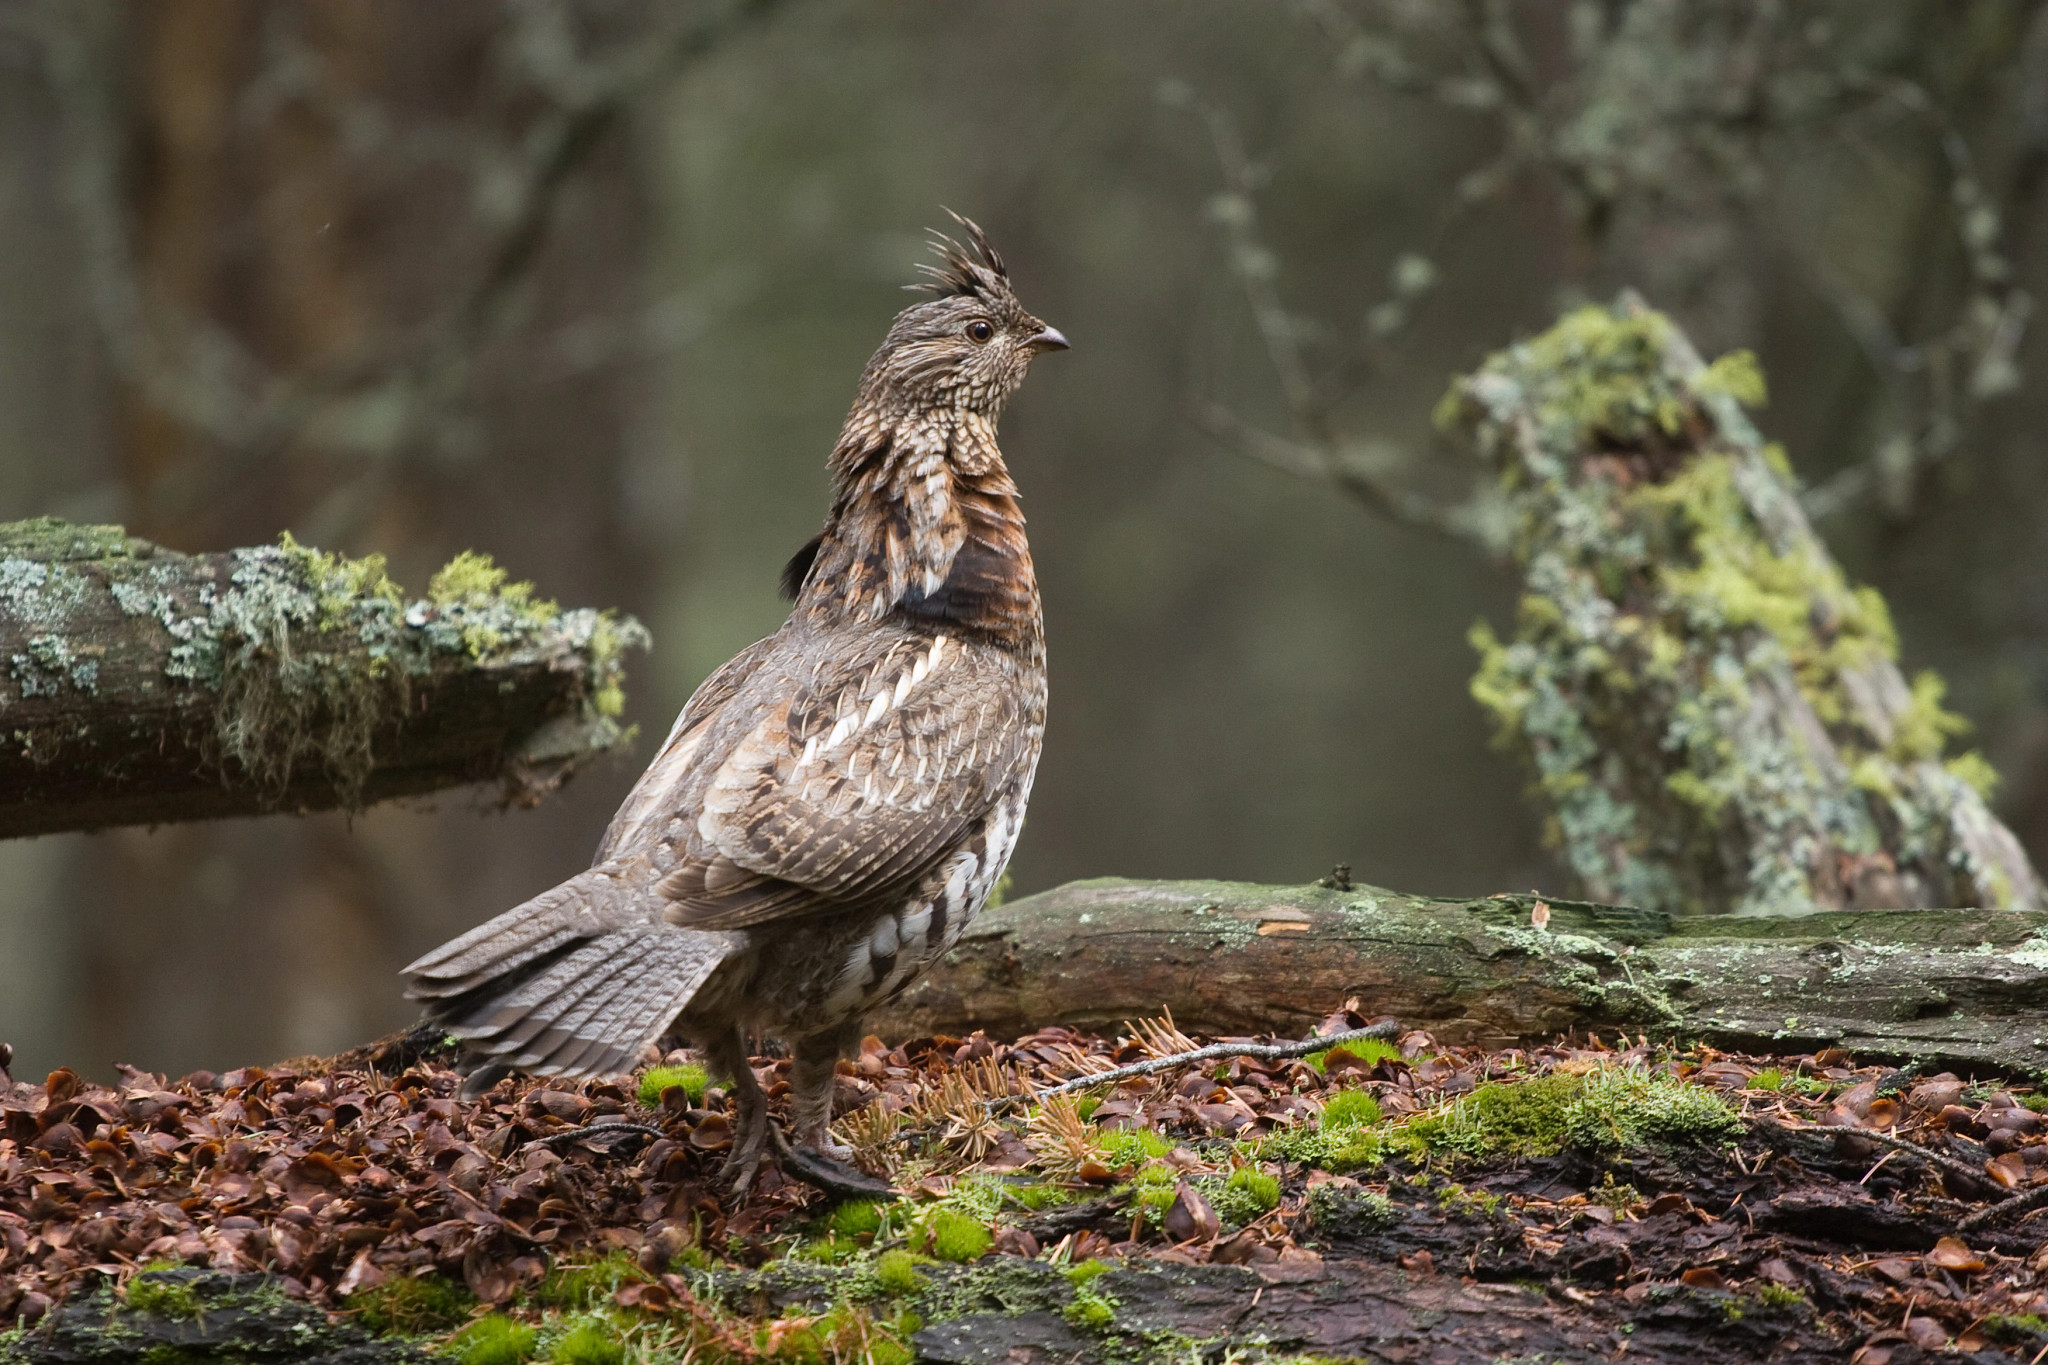 A ruffed grouse struts on a mossy forest floor. 